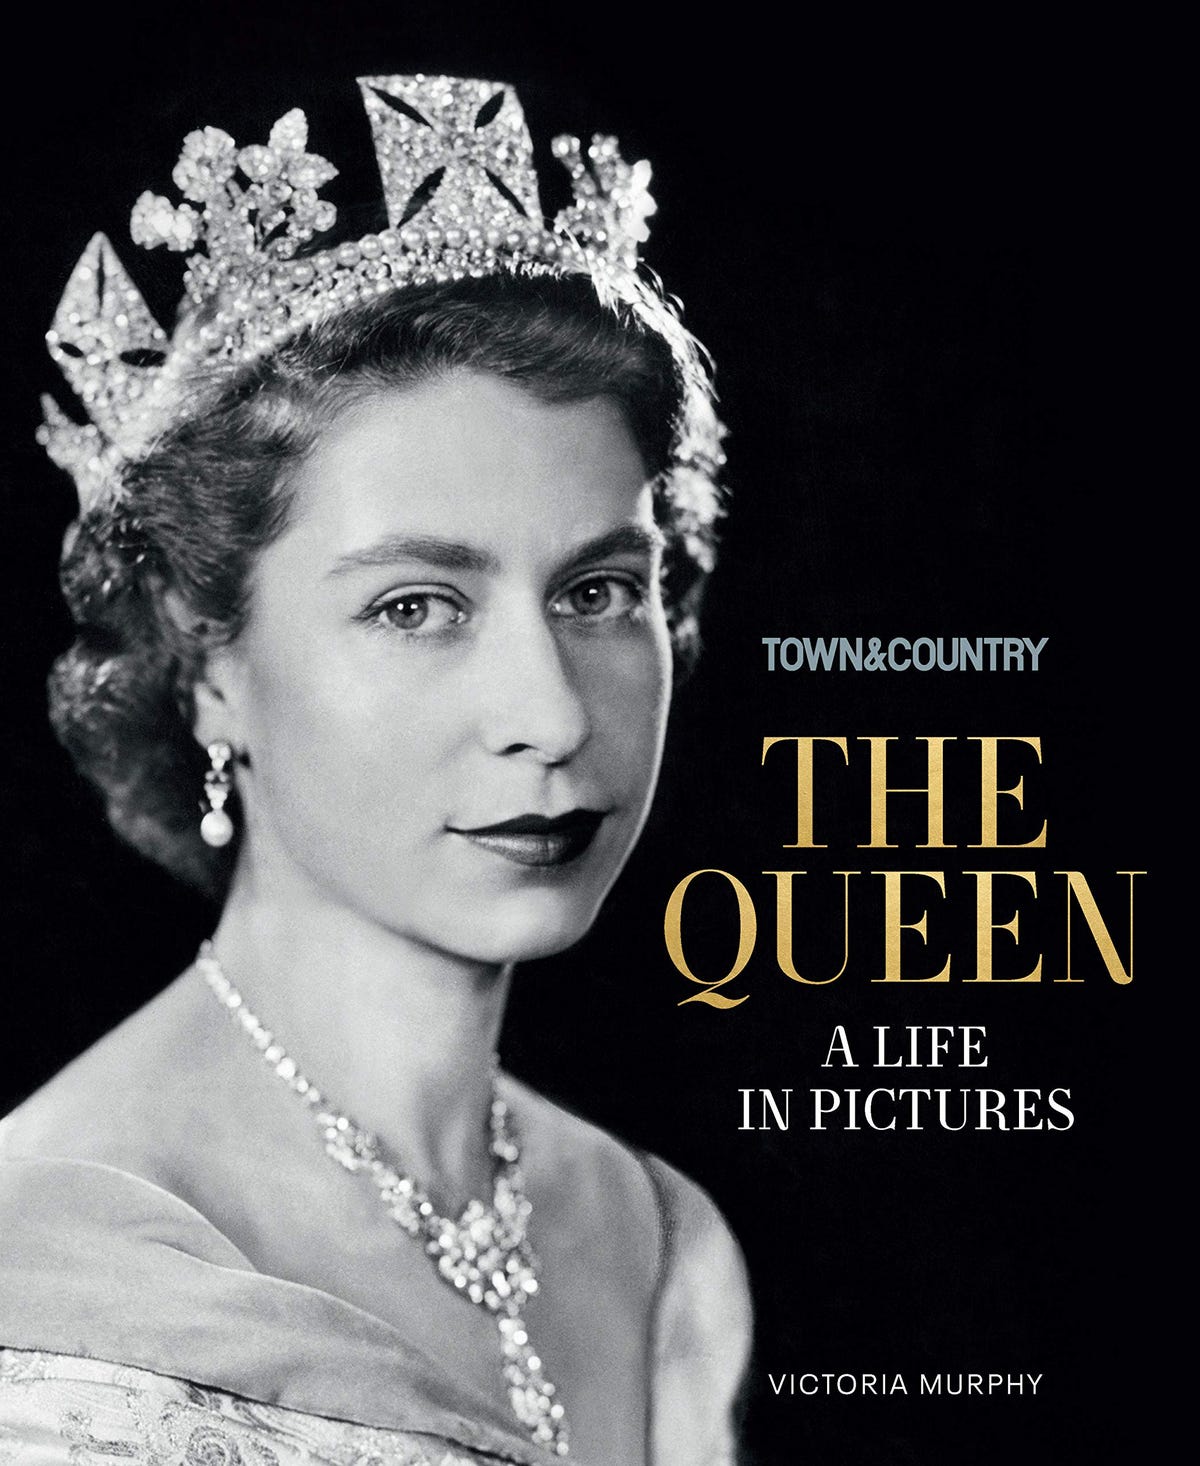 Sneak Peek of Town & Country's New Book 'The Queen' 2021